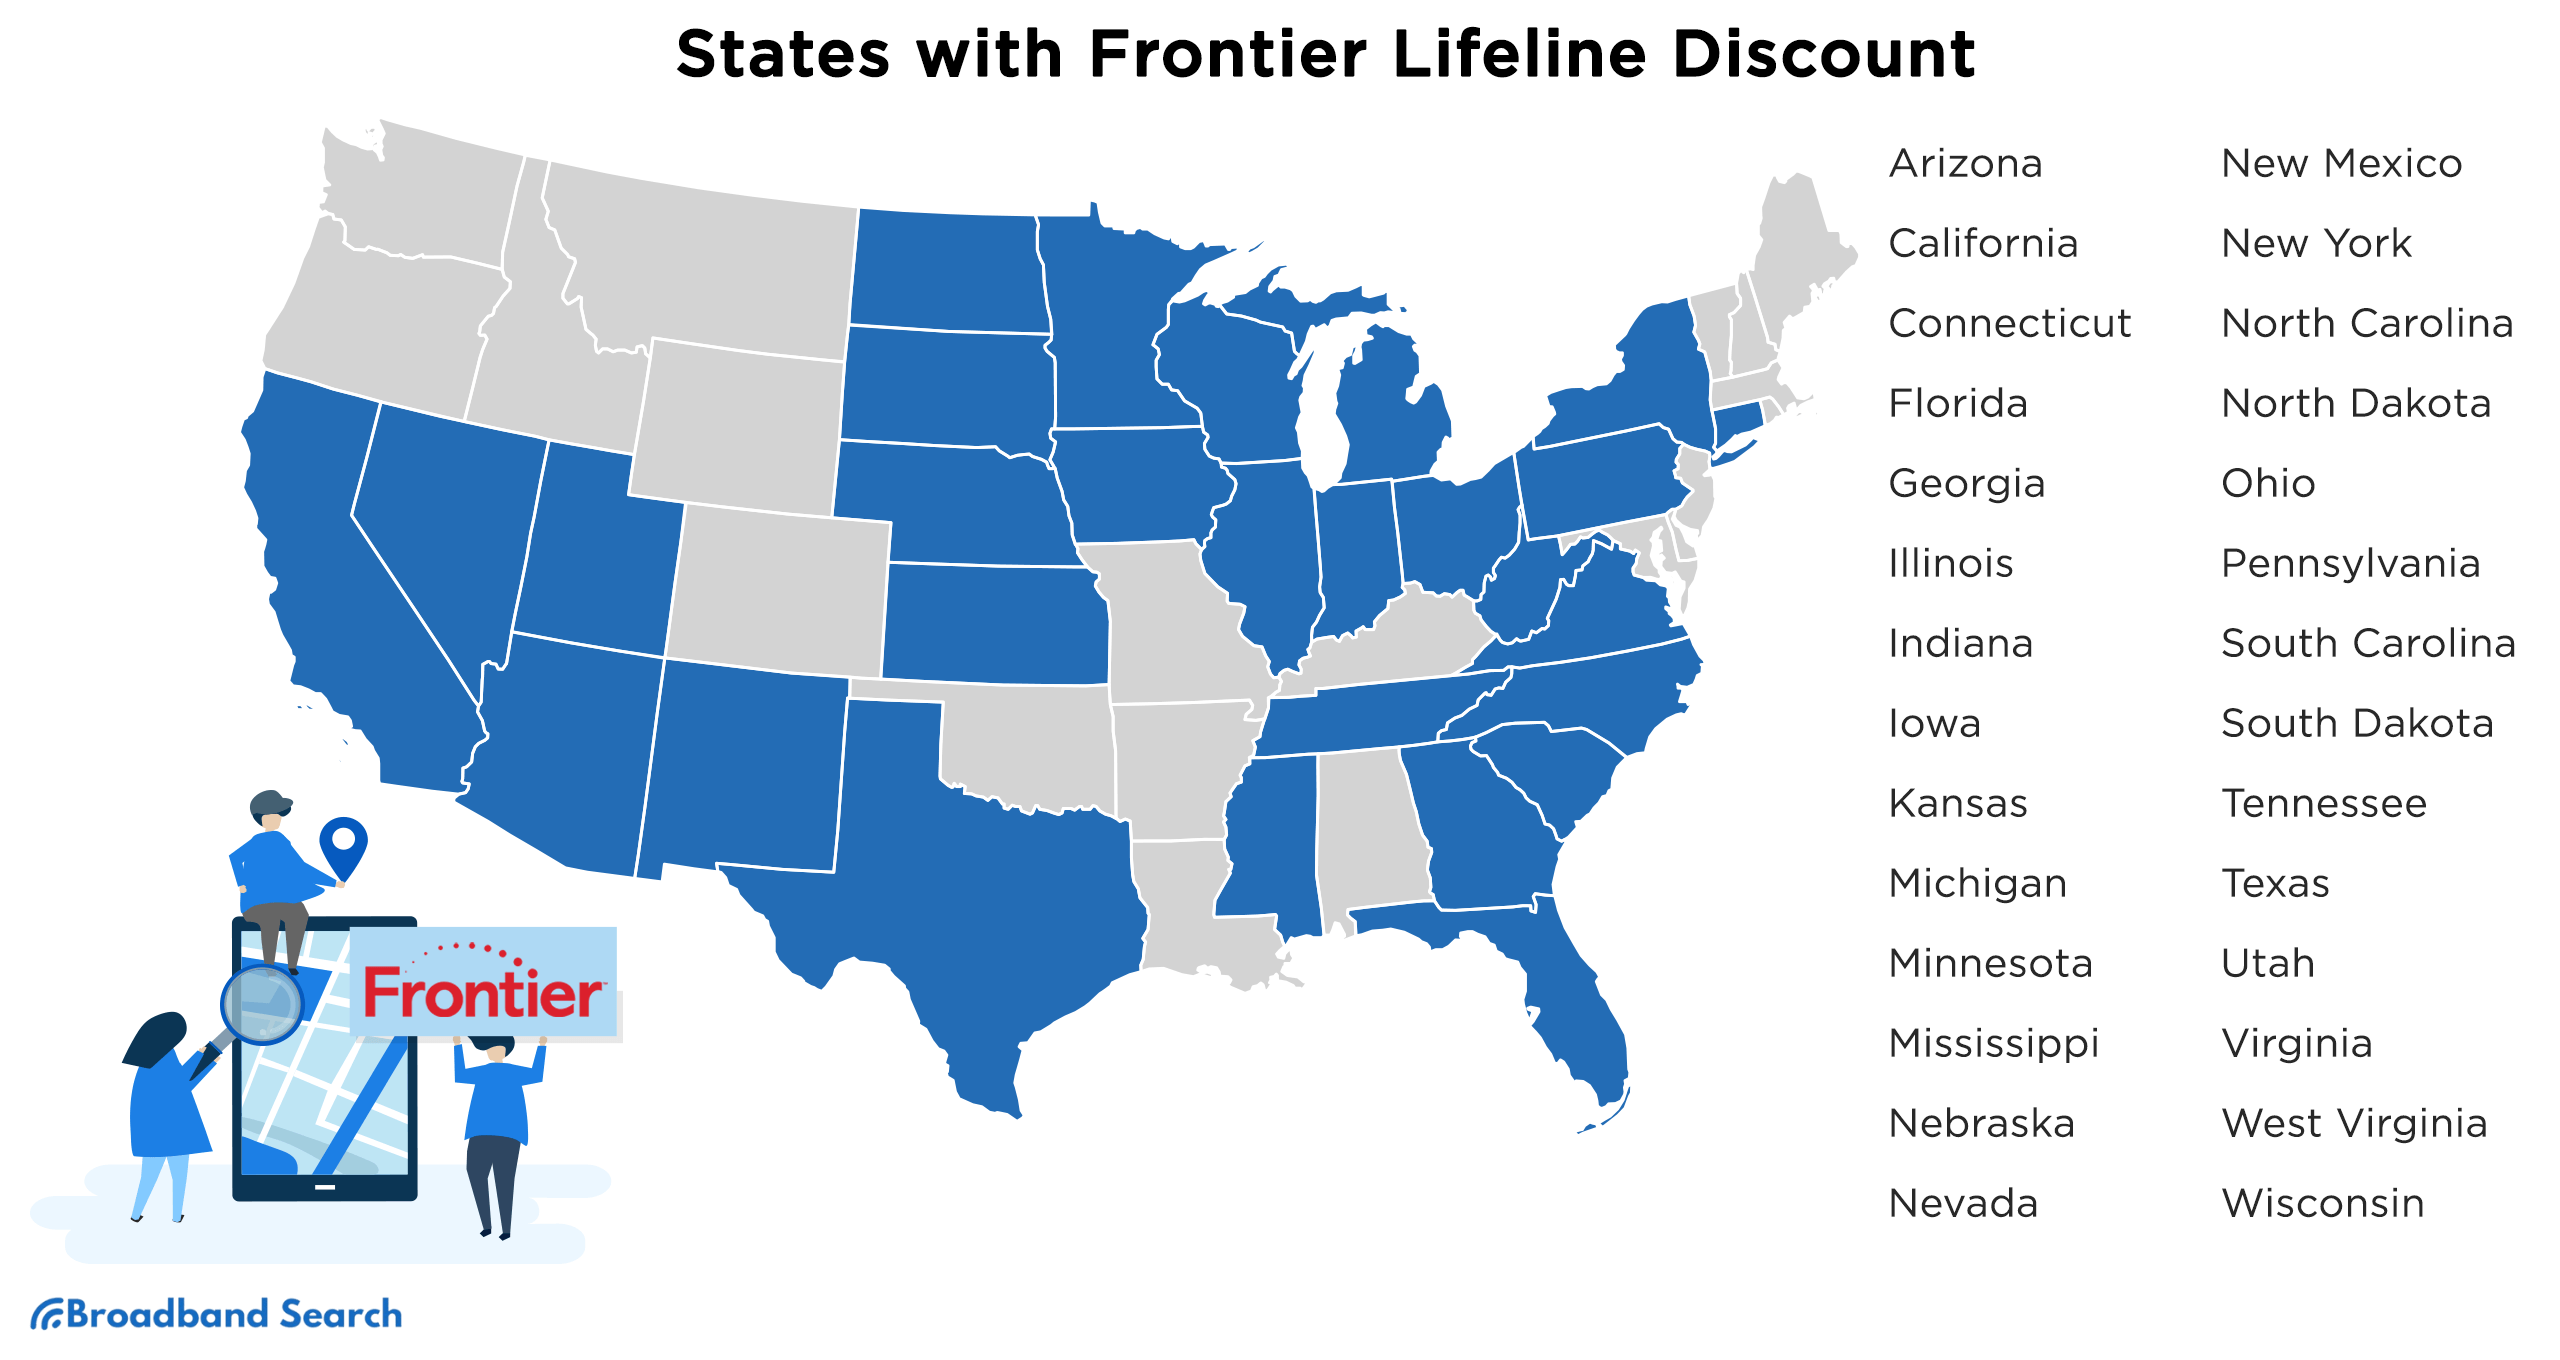 States with Frontier Lifeline discount